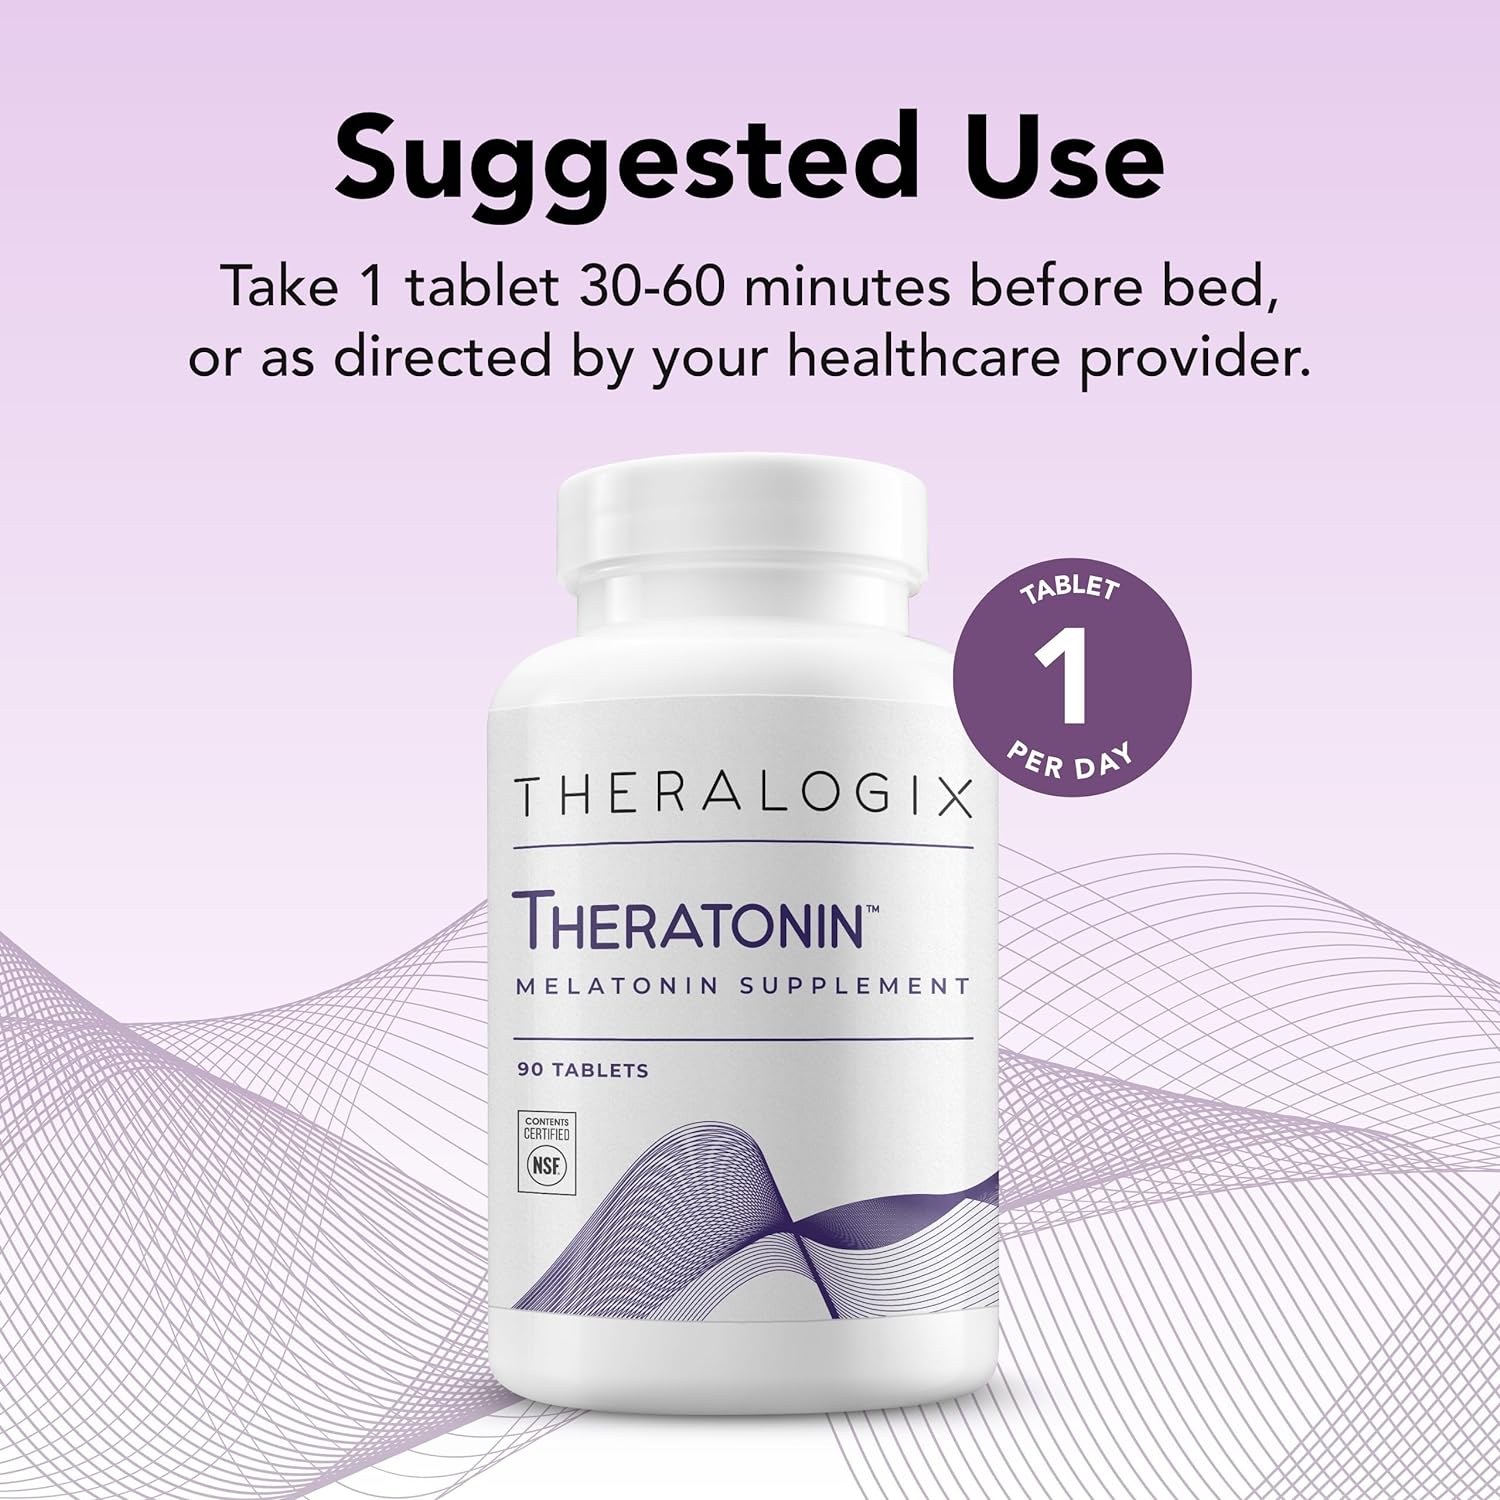 Theralogix Theratonin Melatonin Supplement - 90-Day Supply - Sleep Support Supplement - Melatonin to Aid a Good Night's Sleep - Supplement for Women to Support Fertility - NSF Certified - 90 Tablets : Health & Household